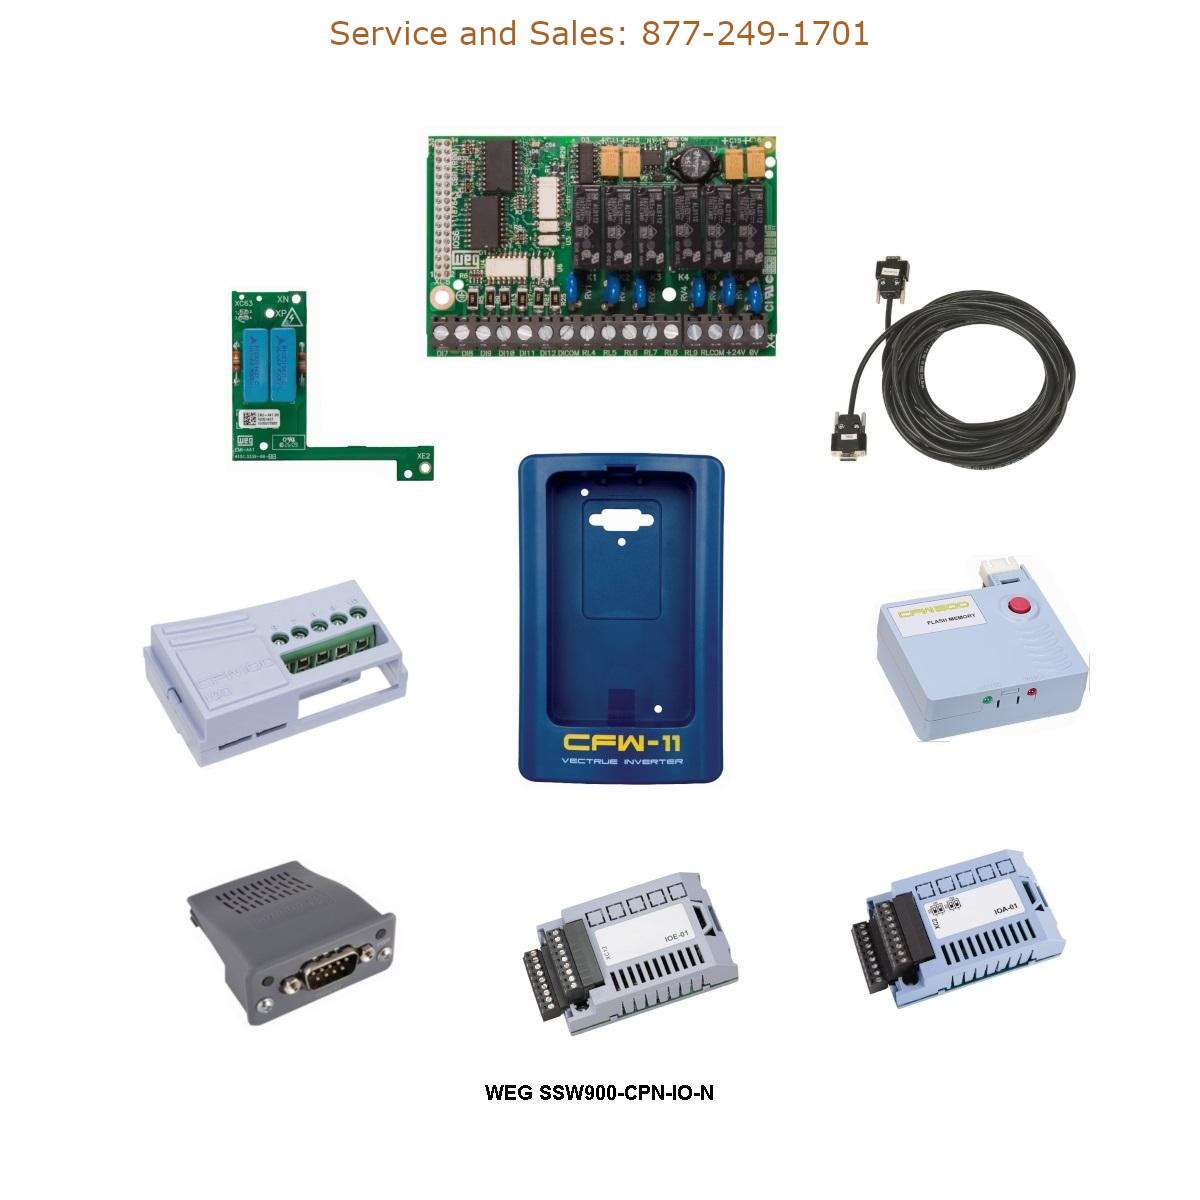 WEG SSW900-CPN-IO-N WEG Model Number SSW900-CPN-IO-N WEG Drives, Accessories for Drives Repair Service, Troubleshooting, Replacement Parts https://gesrepair.com/wp-content/uploads/2022/WEG/WEG_SSW900-CPN-IO-N_Drives_Accessories_for_Drives.jpg